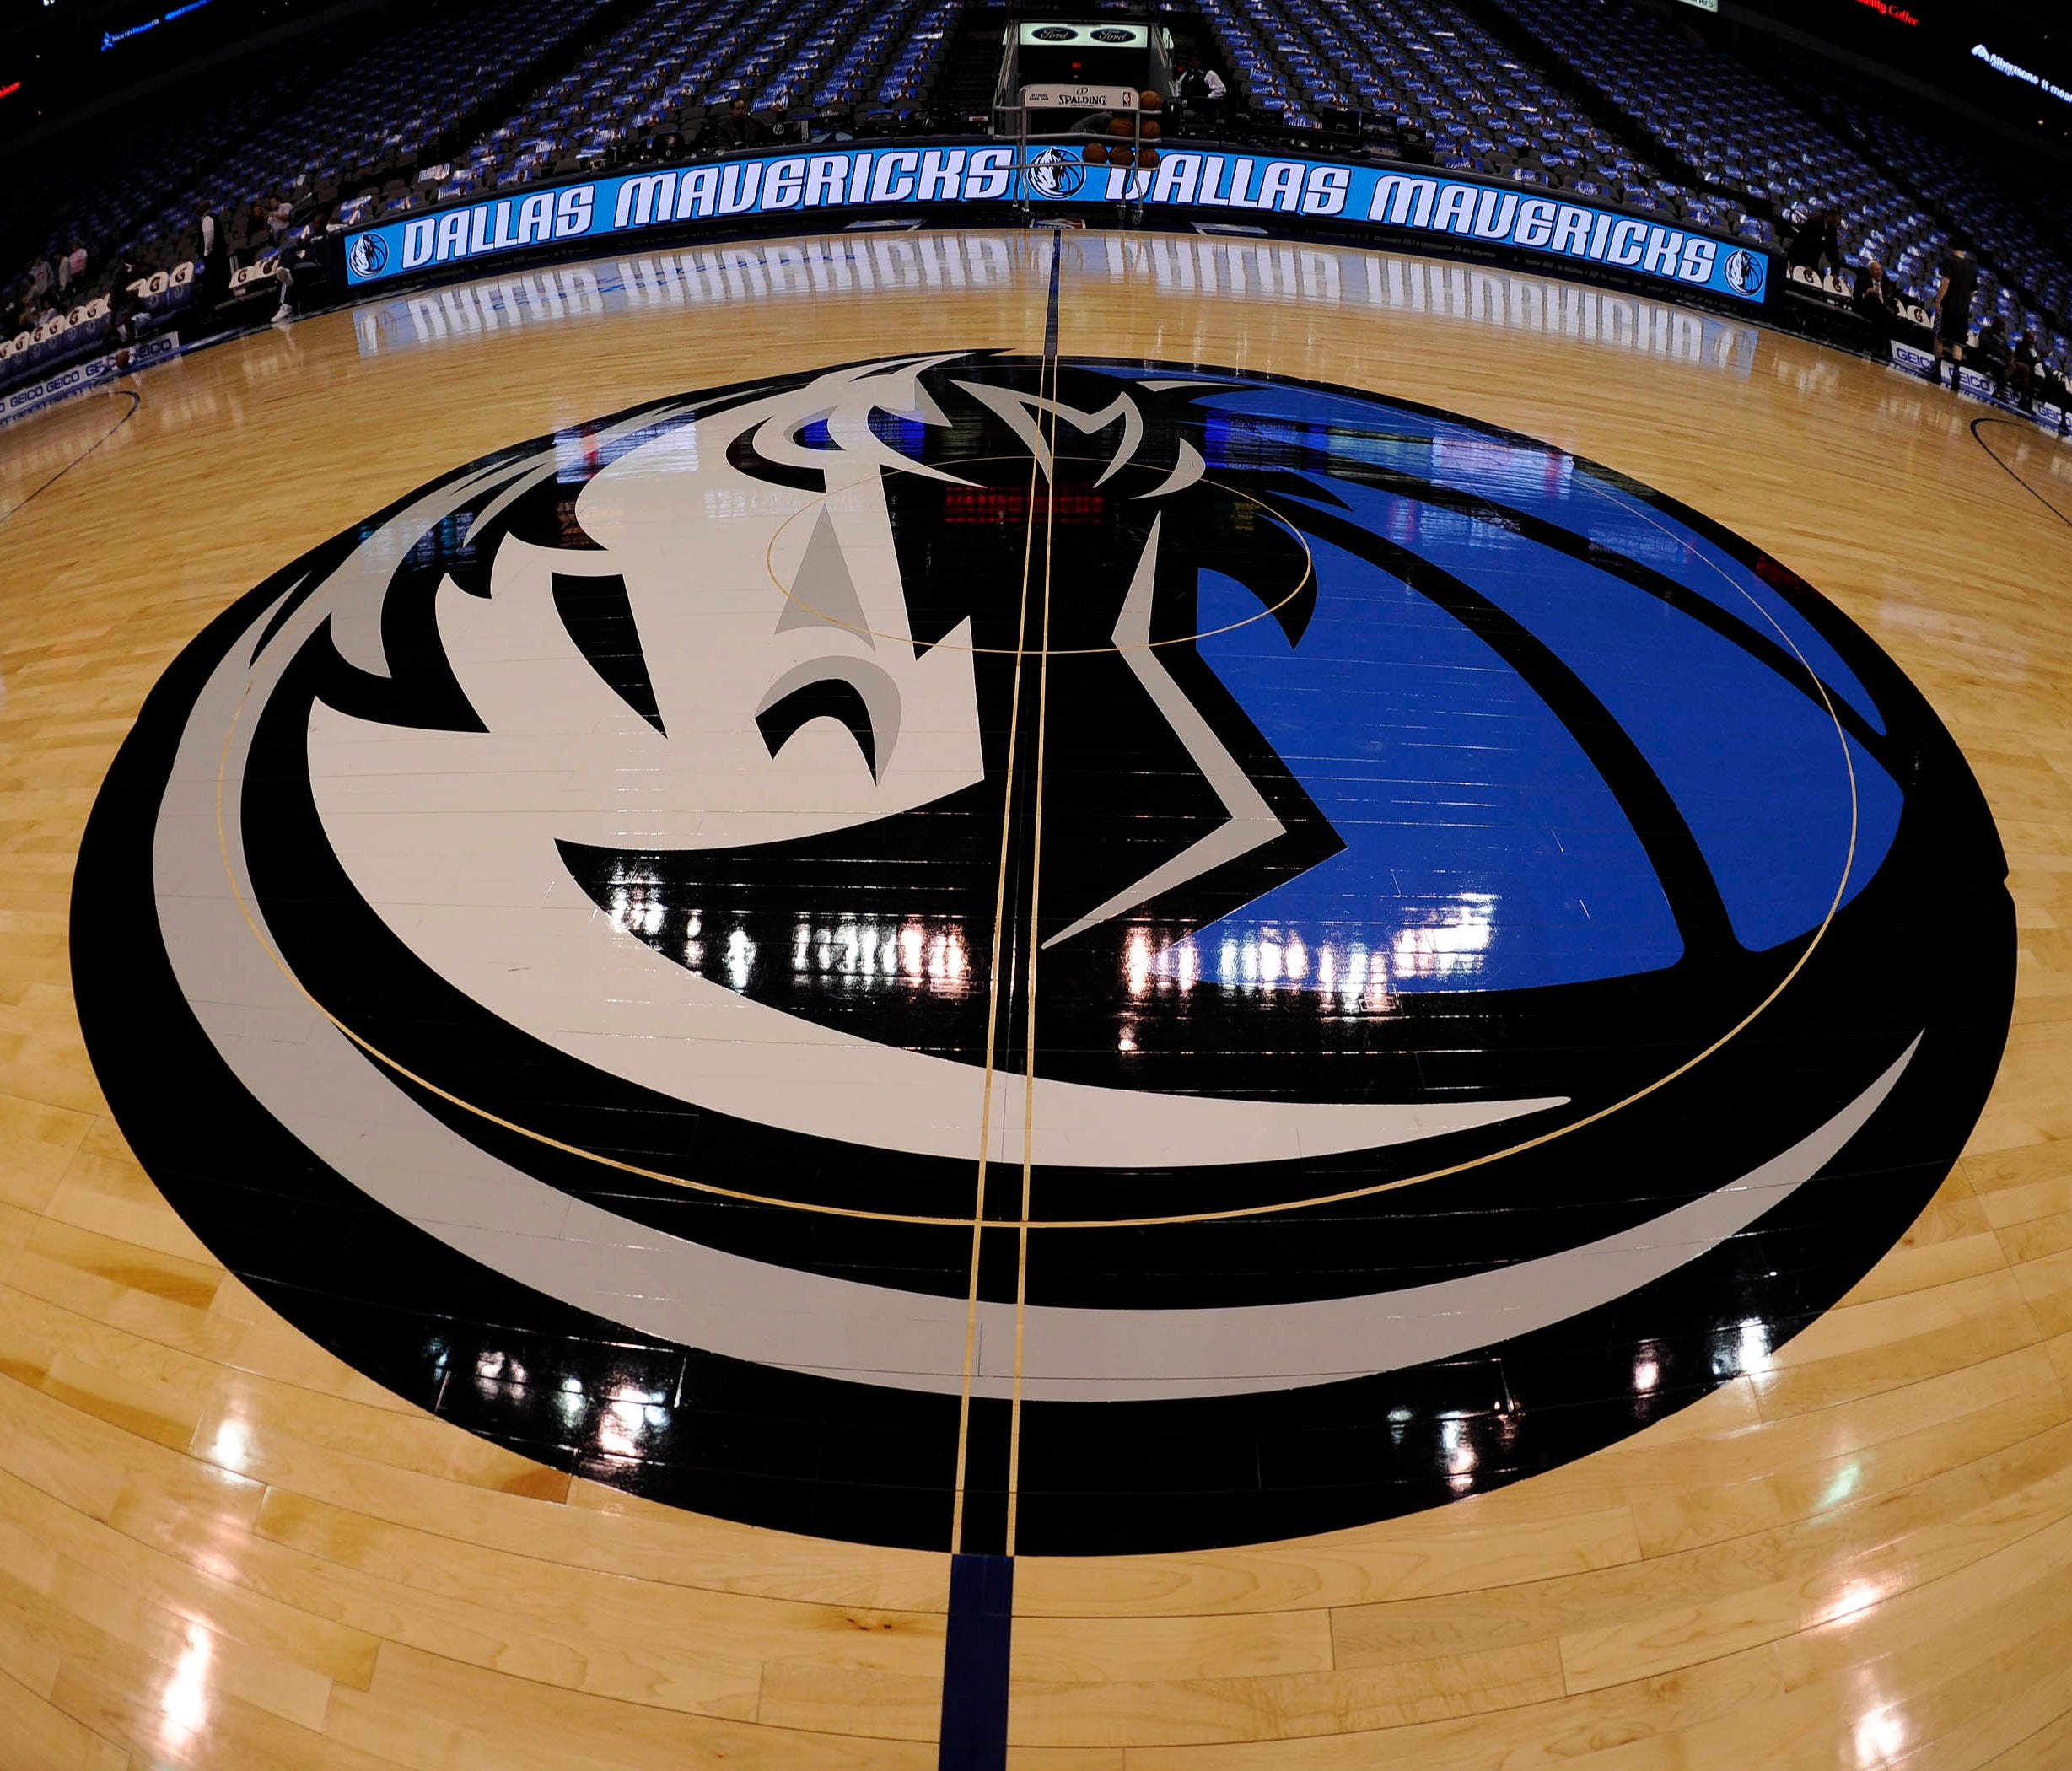 A general view of the Dallas Mavericks logo at center court before the game between the Mavericks and the Sacramento Kings at the American Airlines Center.